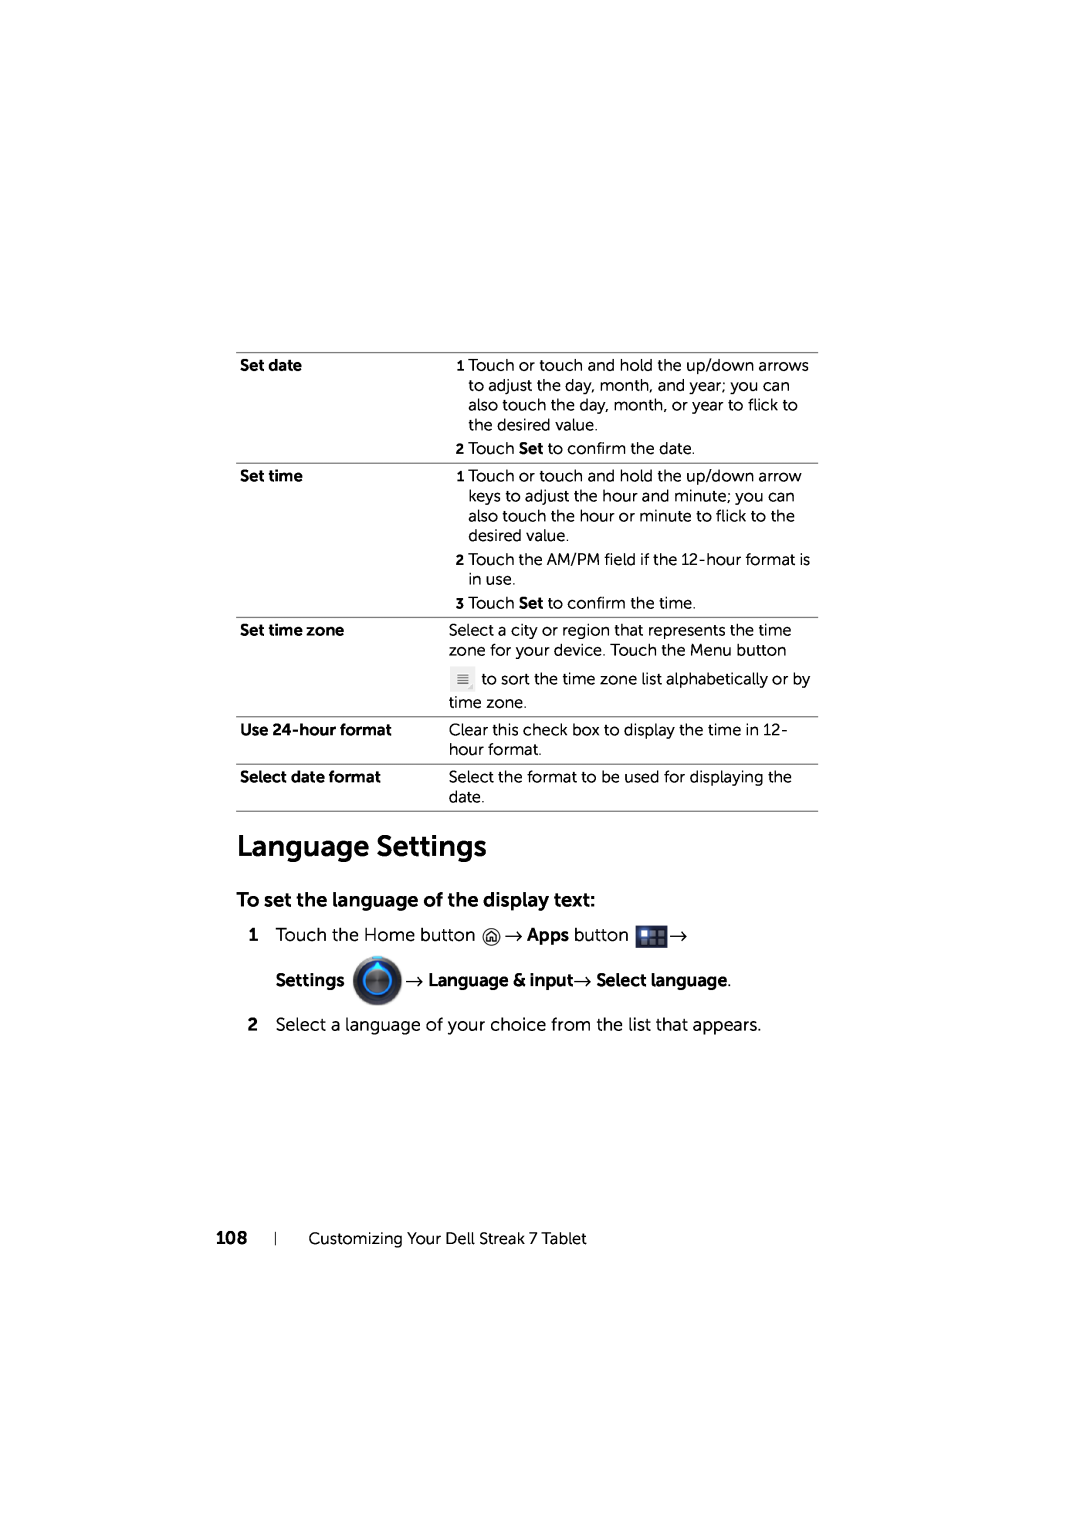 Dell LG7_bk0 user manual Language Settings, To set the language of the display text 